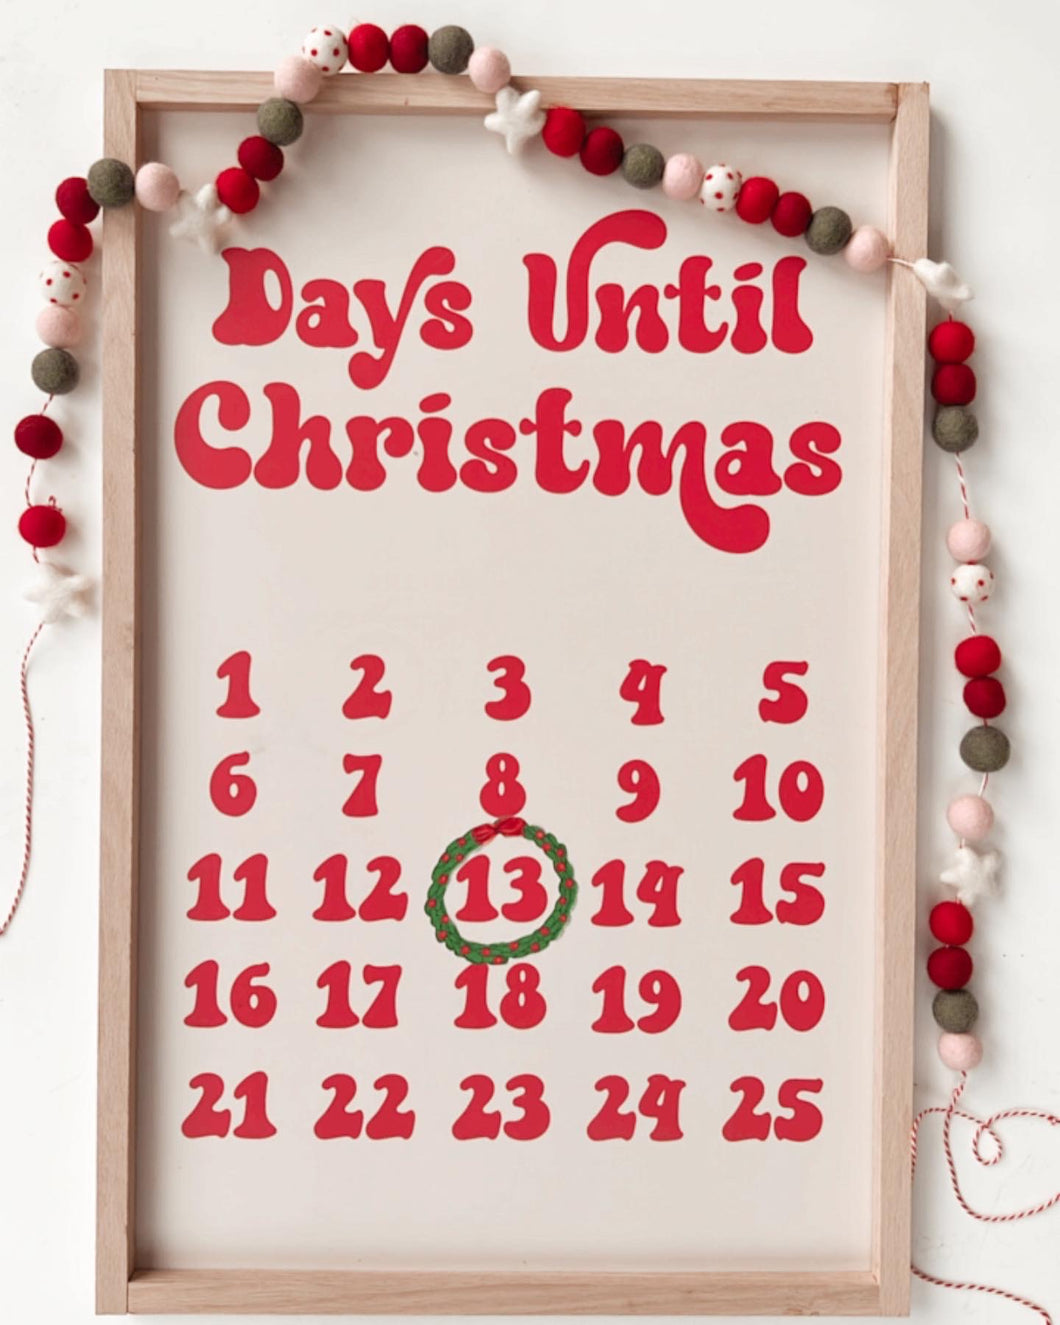 Days until Christmas-red